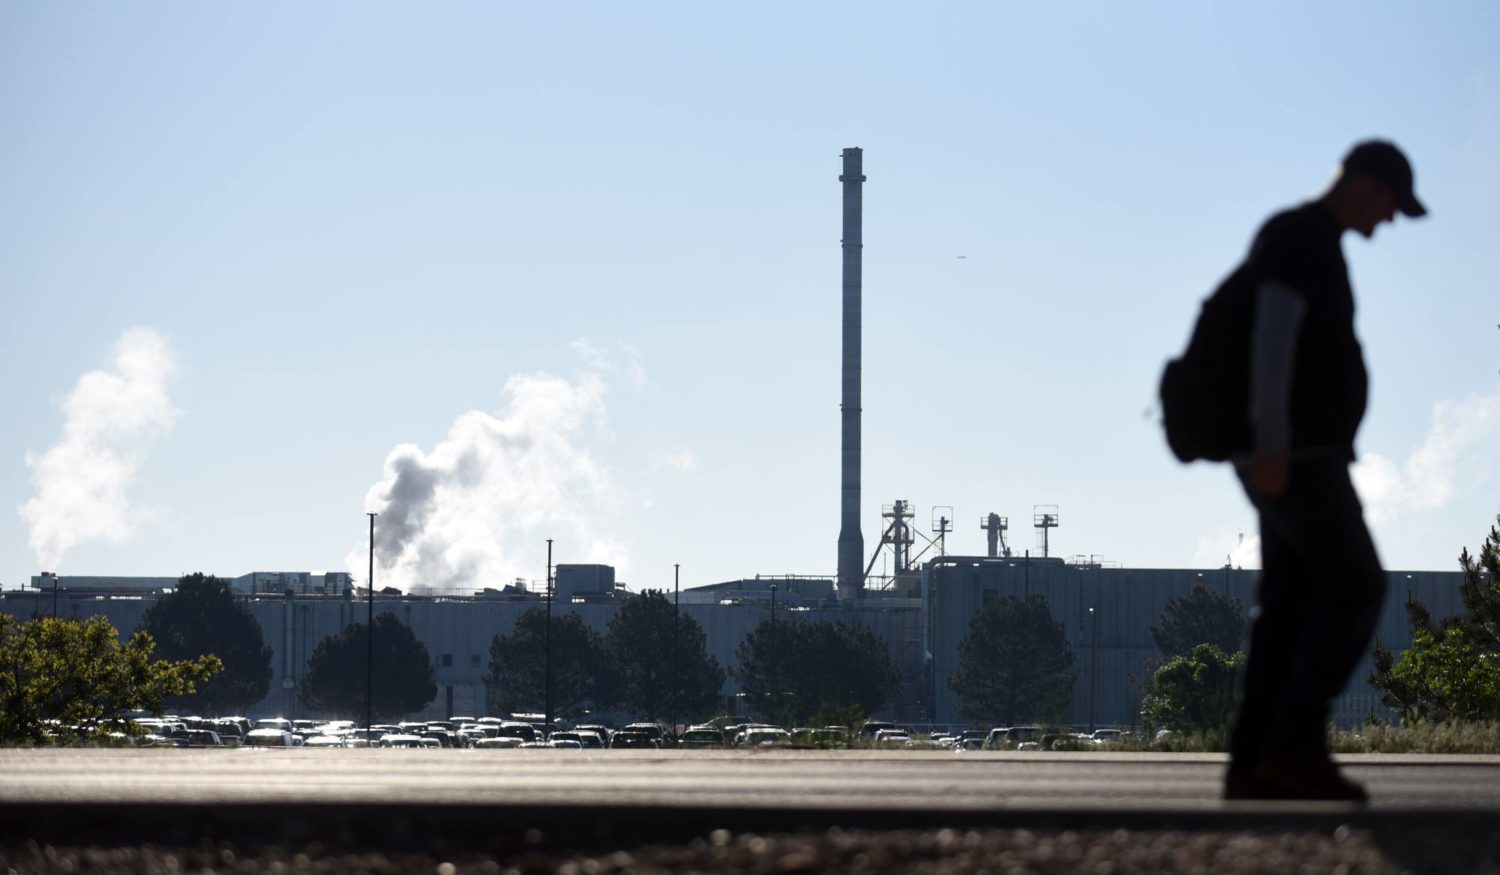 A man is silhouetted as he walks by the JBS facility on Friday, June 4 2021.